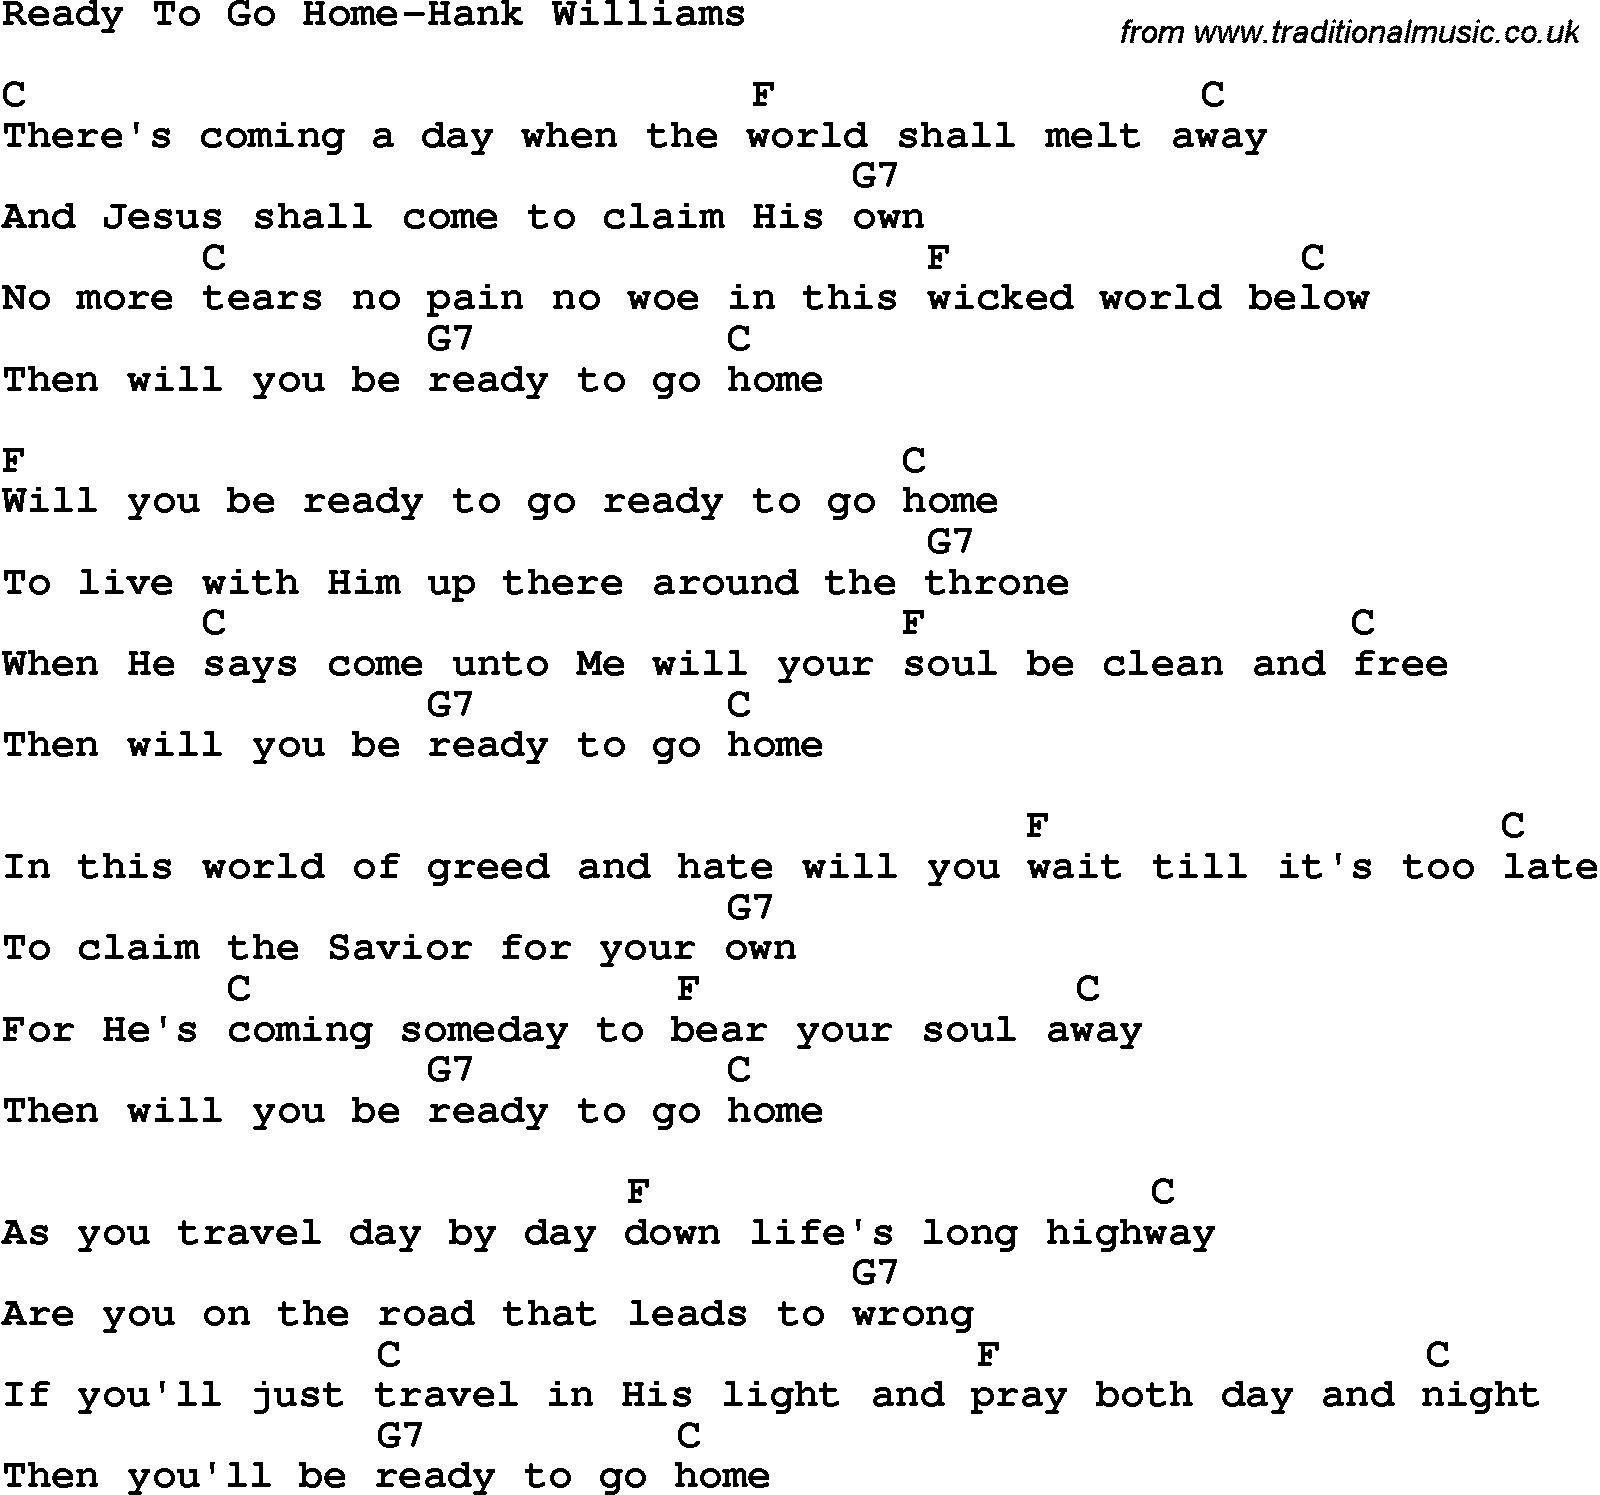 Country, Southern and Bluegrass Gospel Song Ready To Go Home-Hank Williams lyrics and chords